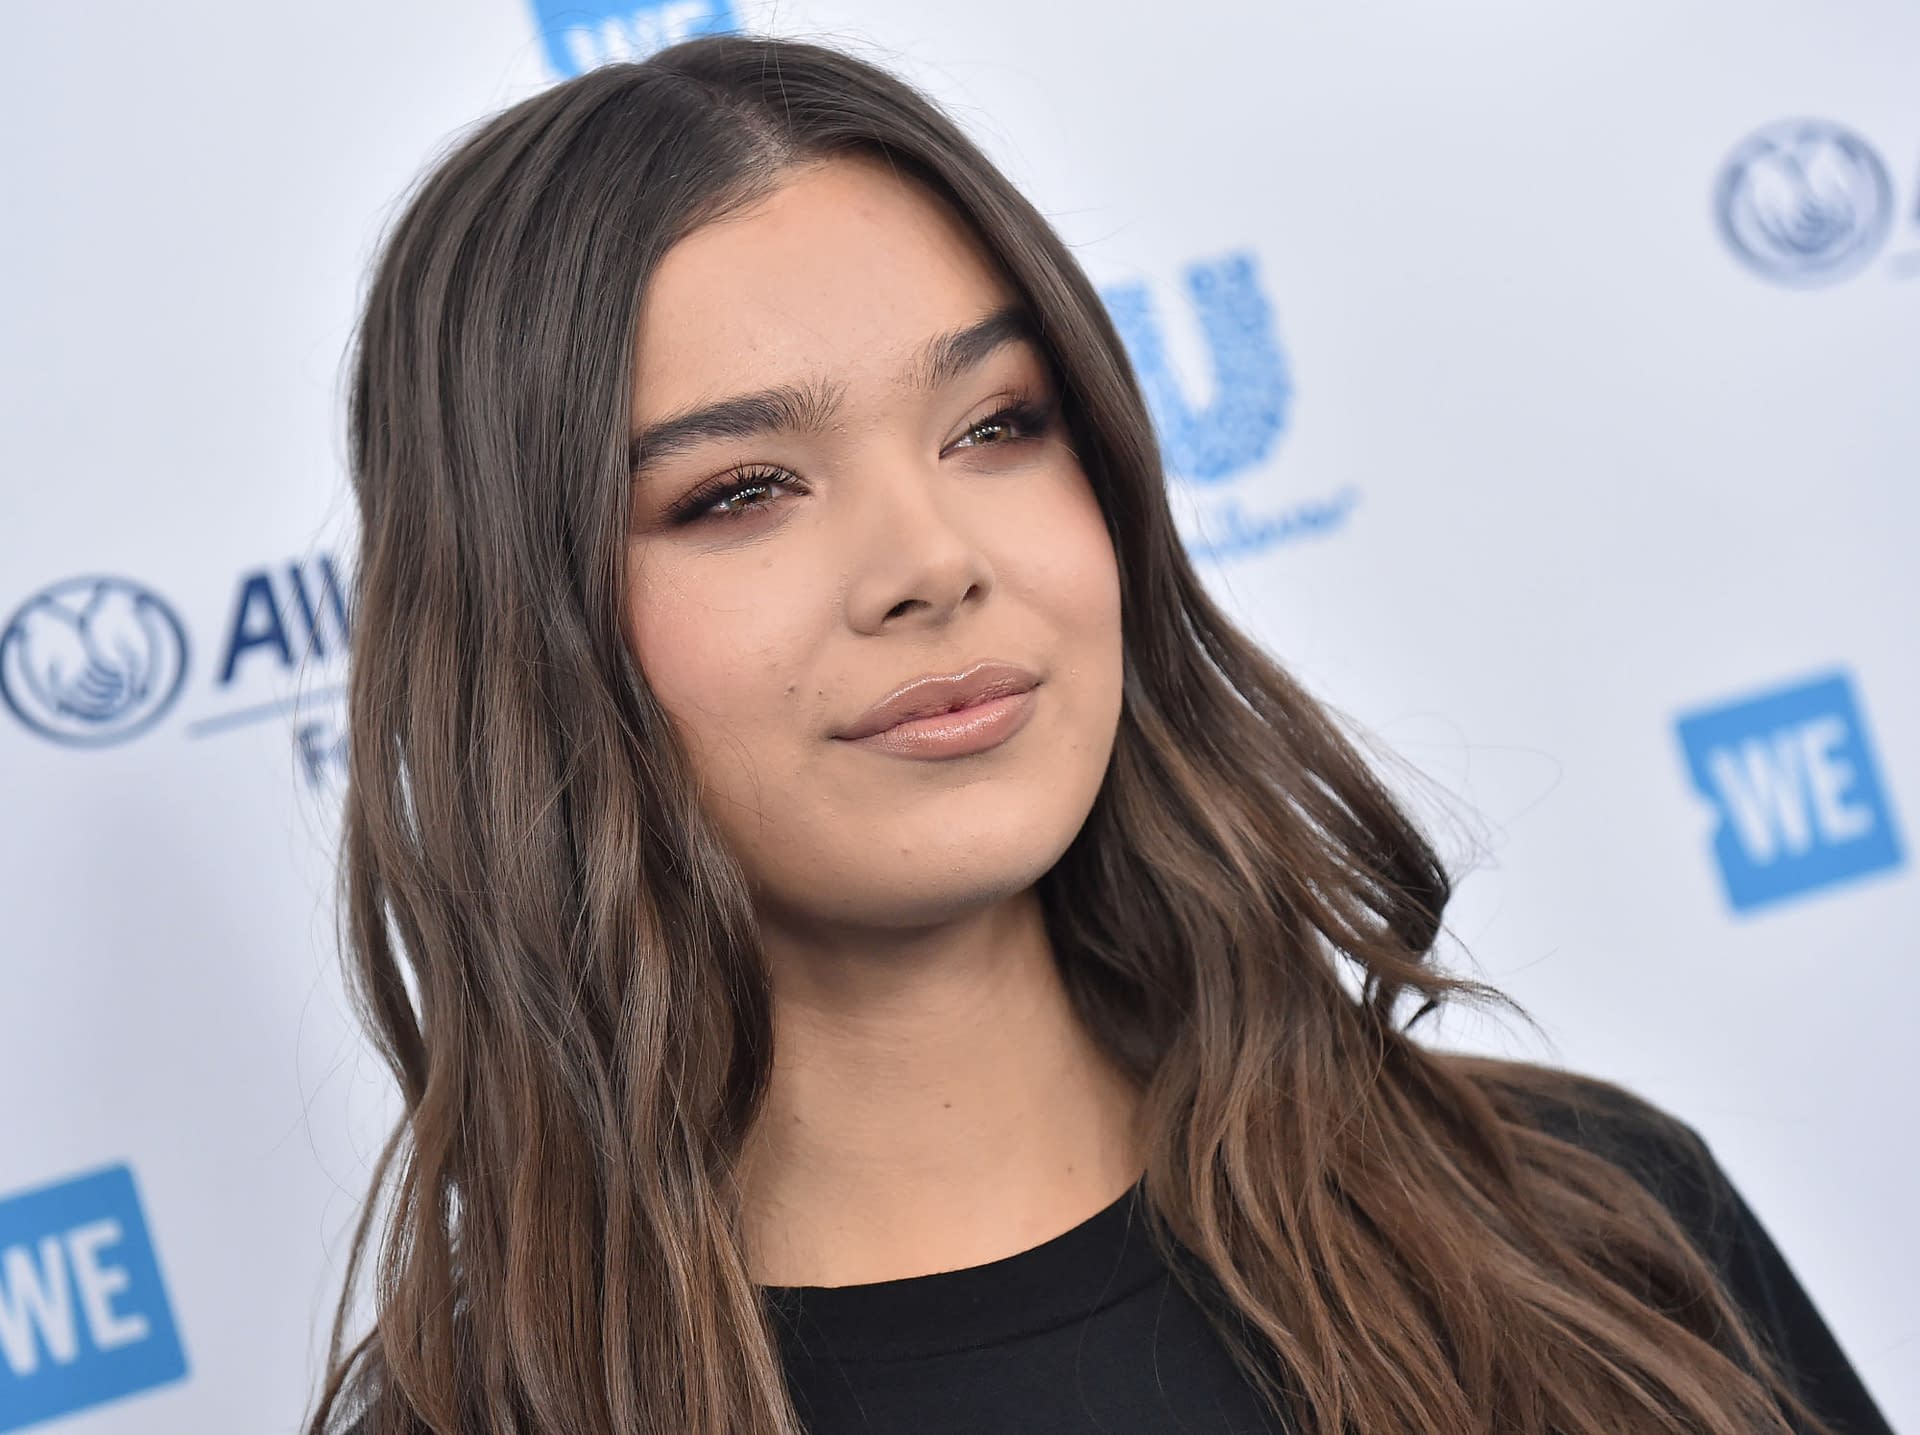 Hailee Steinfeld Has Been Reportedly Offered a Lead Role in the Disney+ "Hawkeye" Series